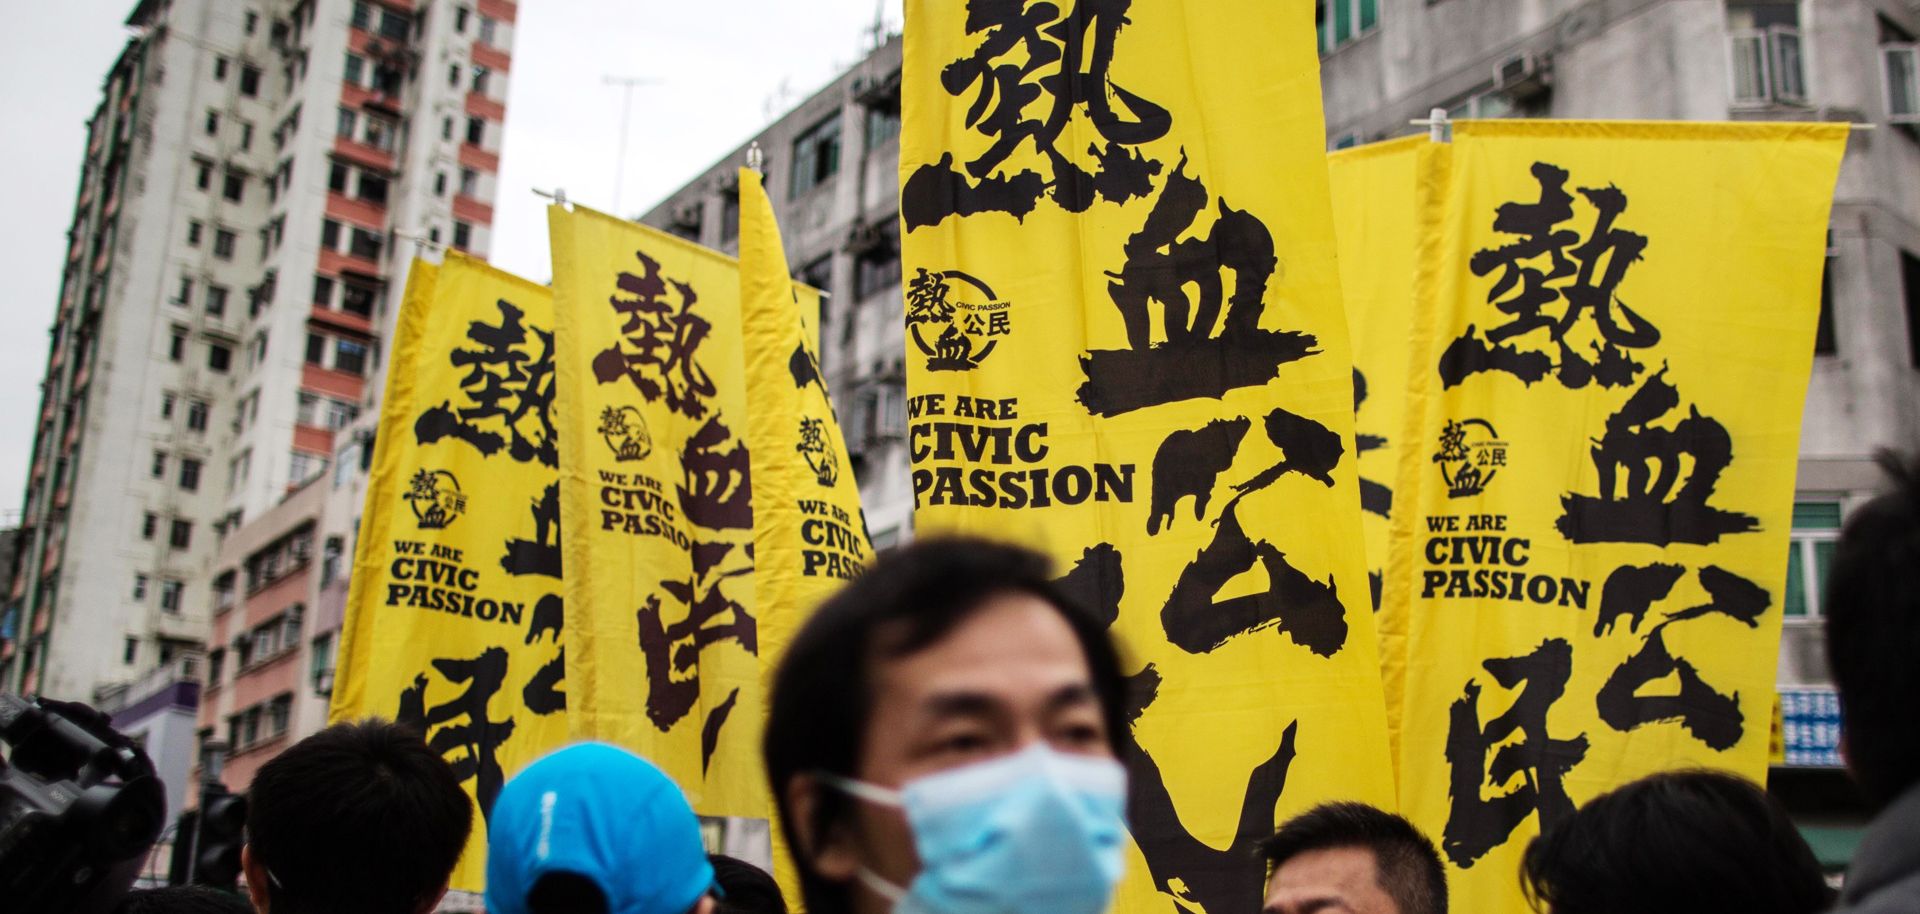 Members of Civic Passion carry flags at a March 1 protest against parallel trading in Hong Kong's Yuen Long district.